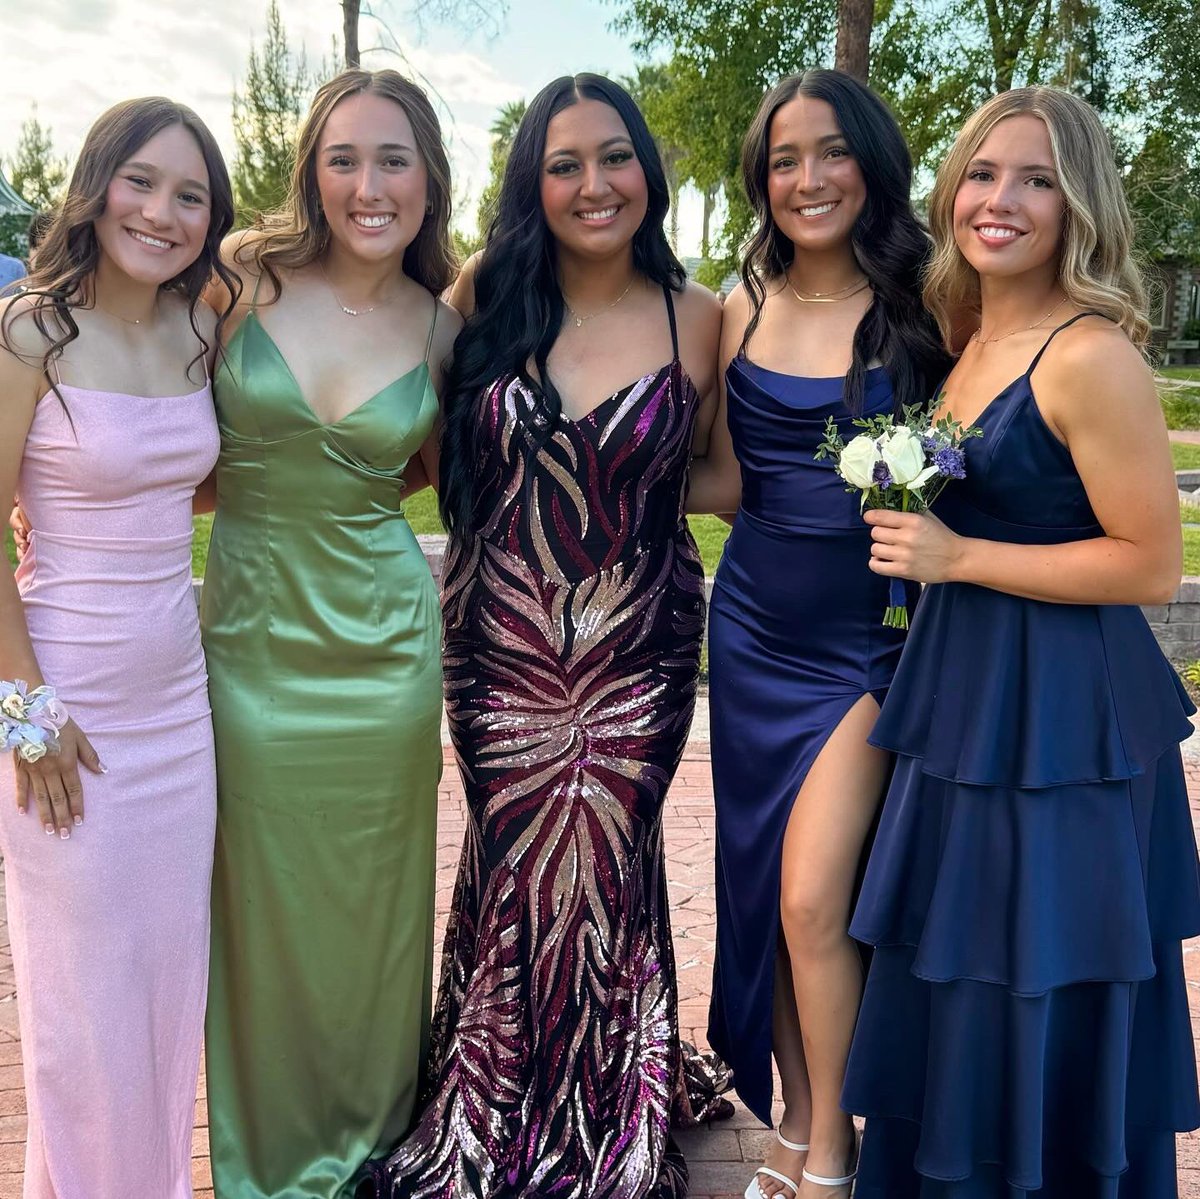 ✨ SENIOR EDITION ✨ After their first playoff DUB last week against Perry to Senior Prom Edition after their hard fought DUB today against Red Mountain. They sure do clean up nice 🧡💛 We are going to miss this group of ladies next year 🥹 #SeniorYear #SeniorSeason #PromEdition